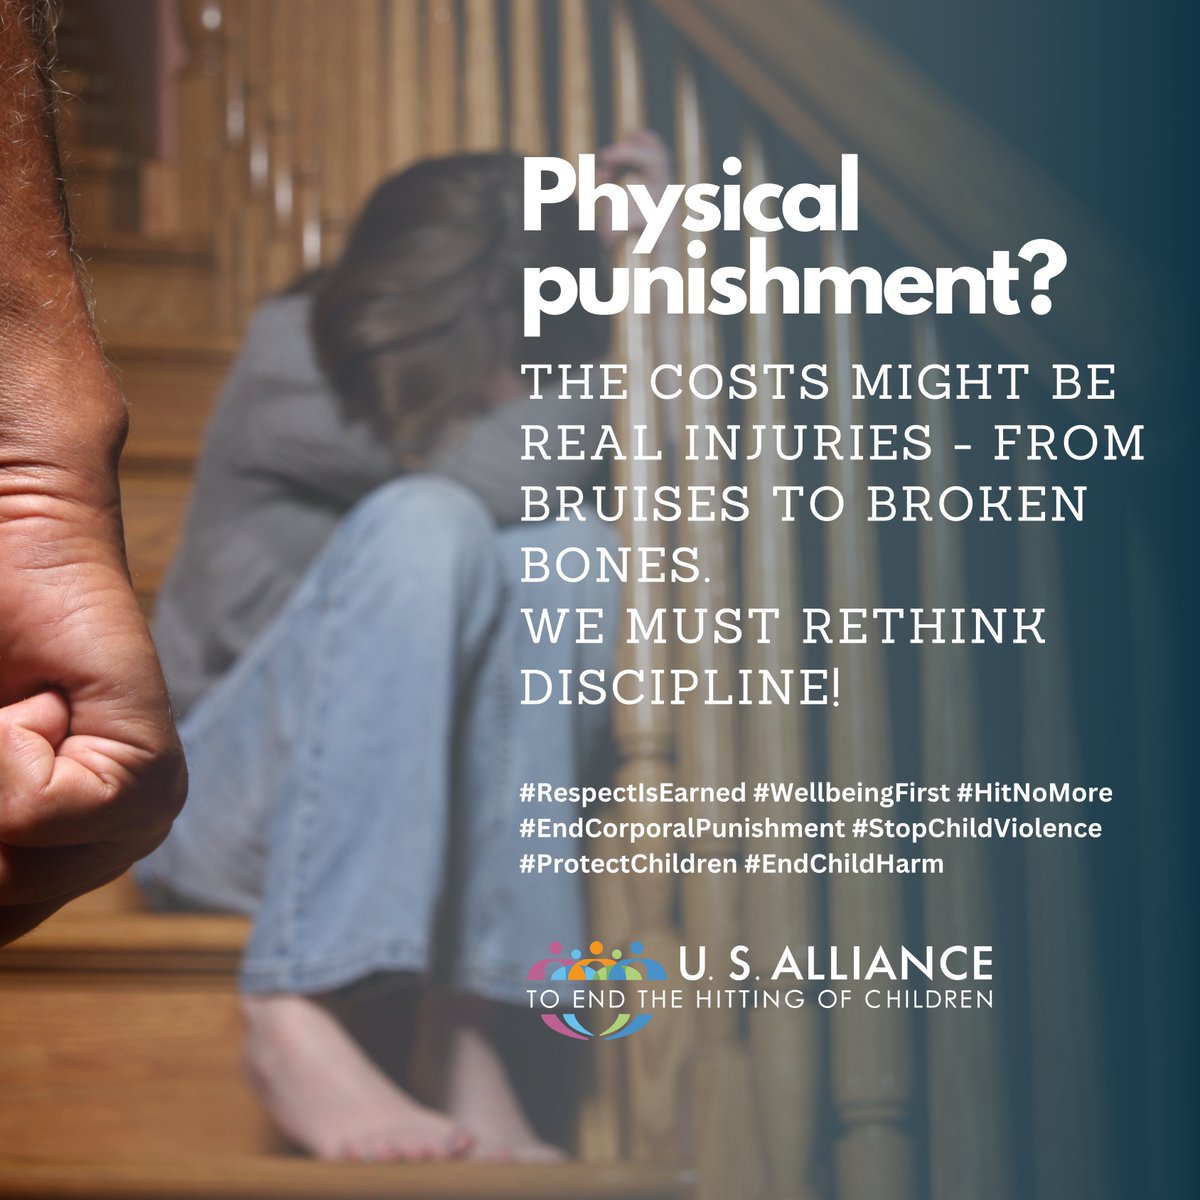 Physical punishment? The costs might be real injuries - from bruises to broken bones. We must rethink discipline! 
#ChildSafety #StopChildAbuse #ProtectChildren #ChildProtection #NoToViolence #WellbeingFirst #HitNoMore #BreakTheCycleOfViolence #PositiveParenting #ChildRights